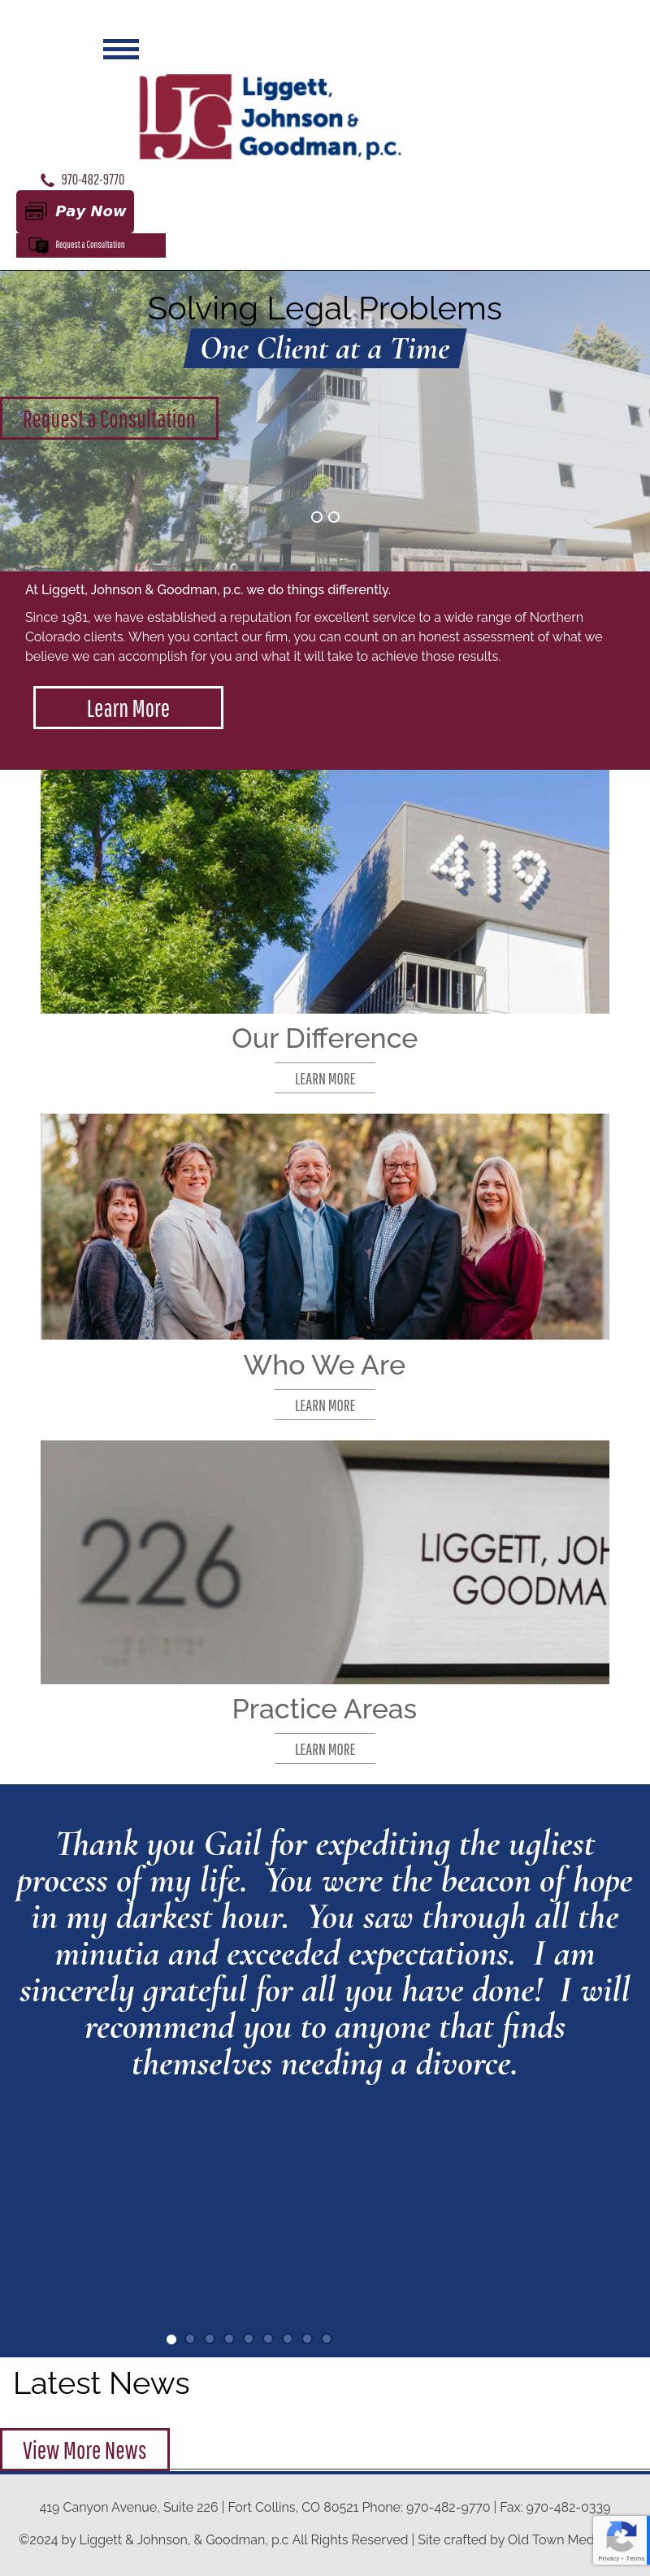 Liggett, Smith & Johnson, P.C. - Fort Collins CO Lawyers